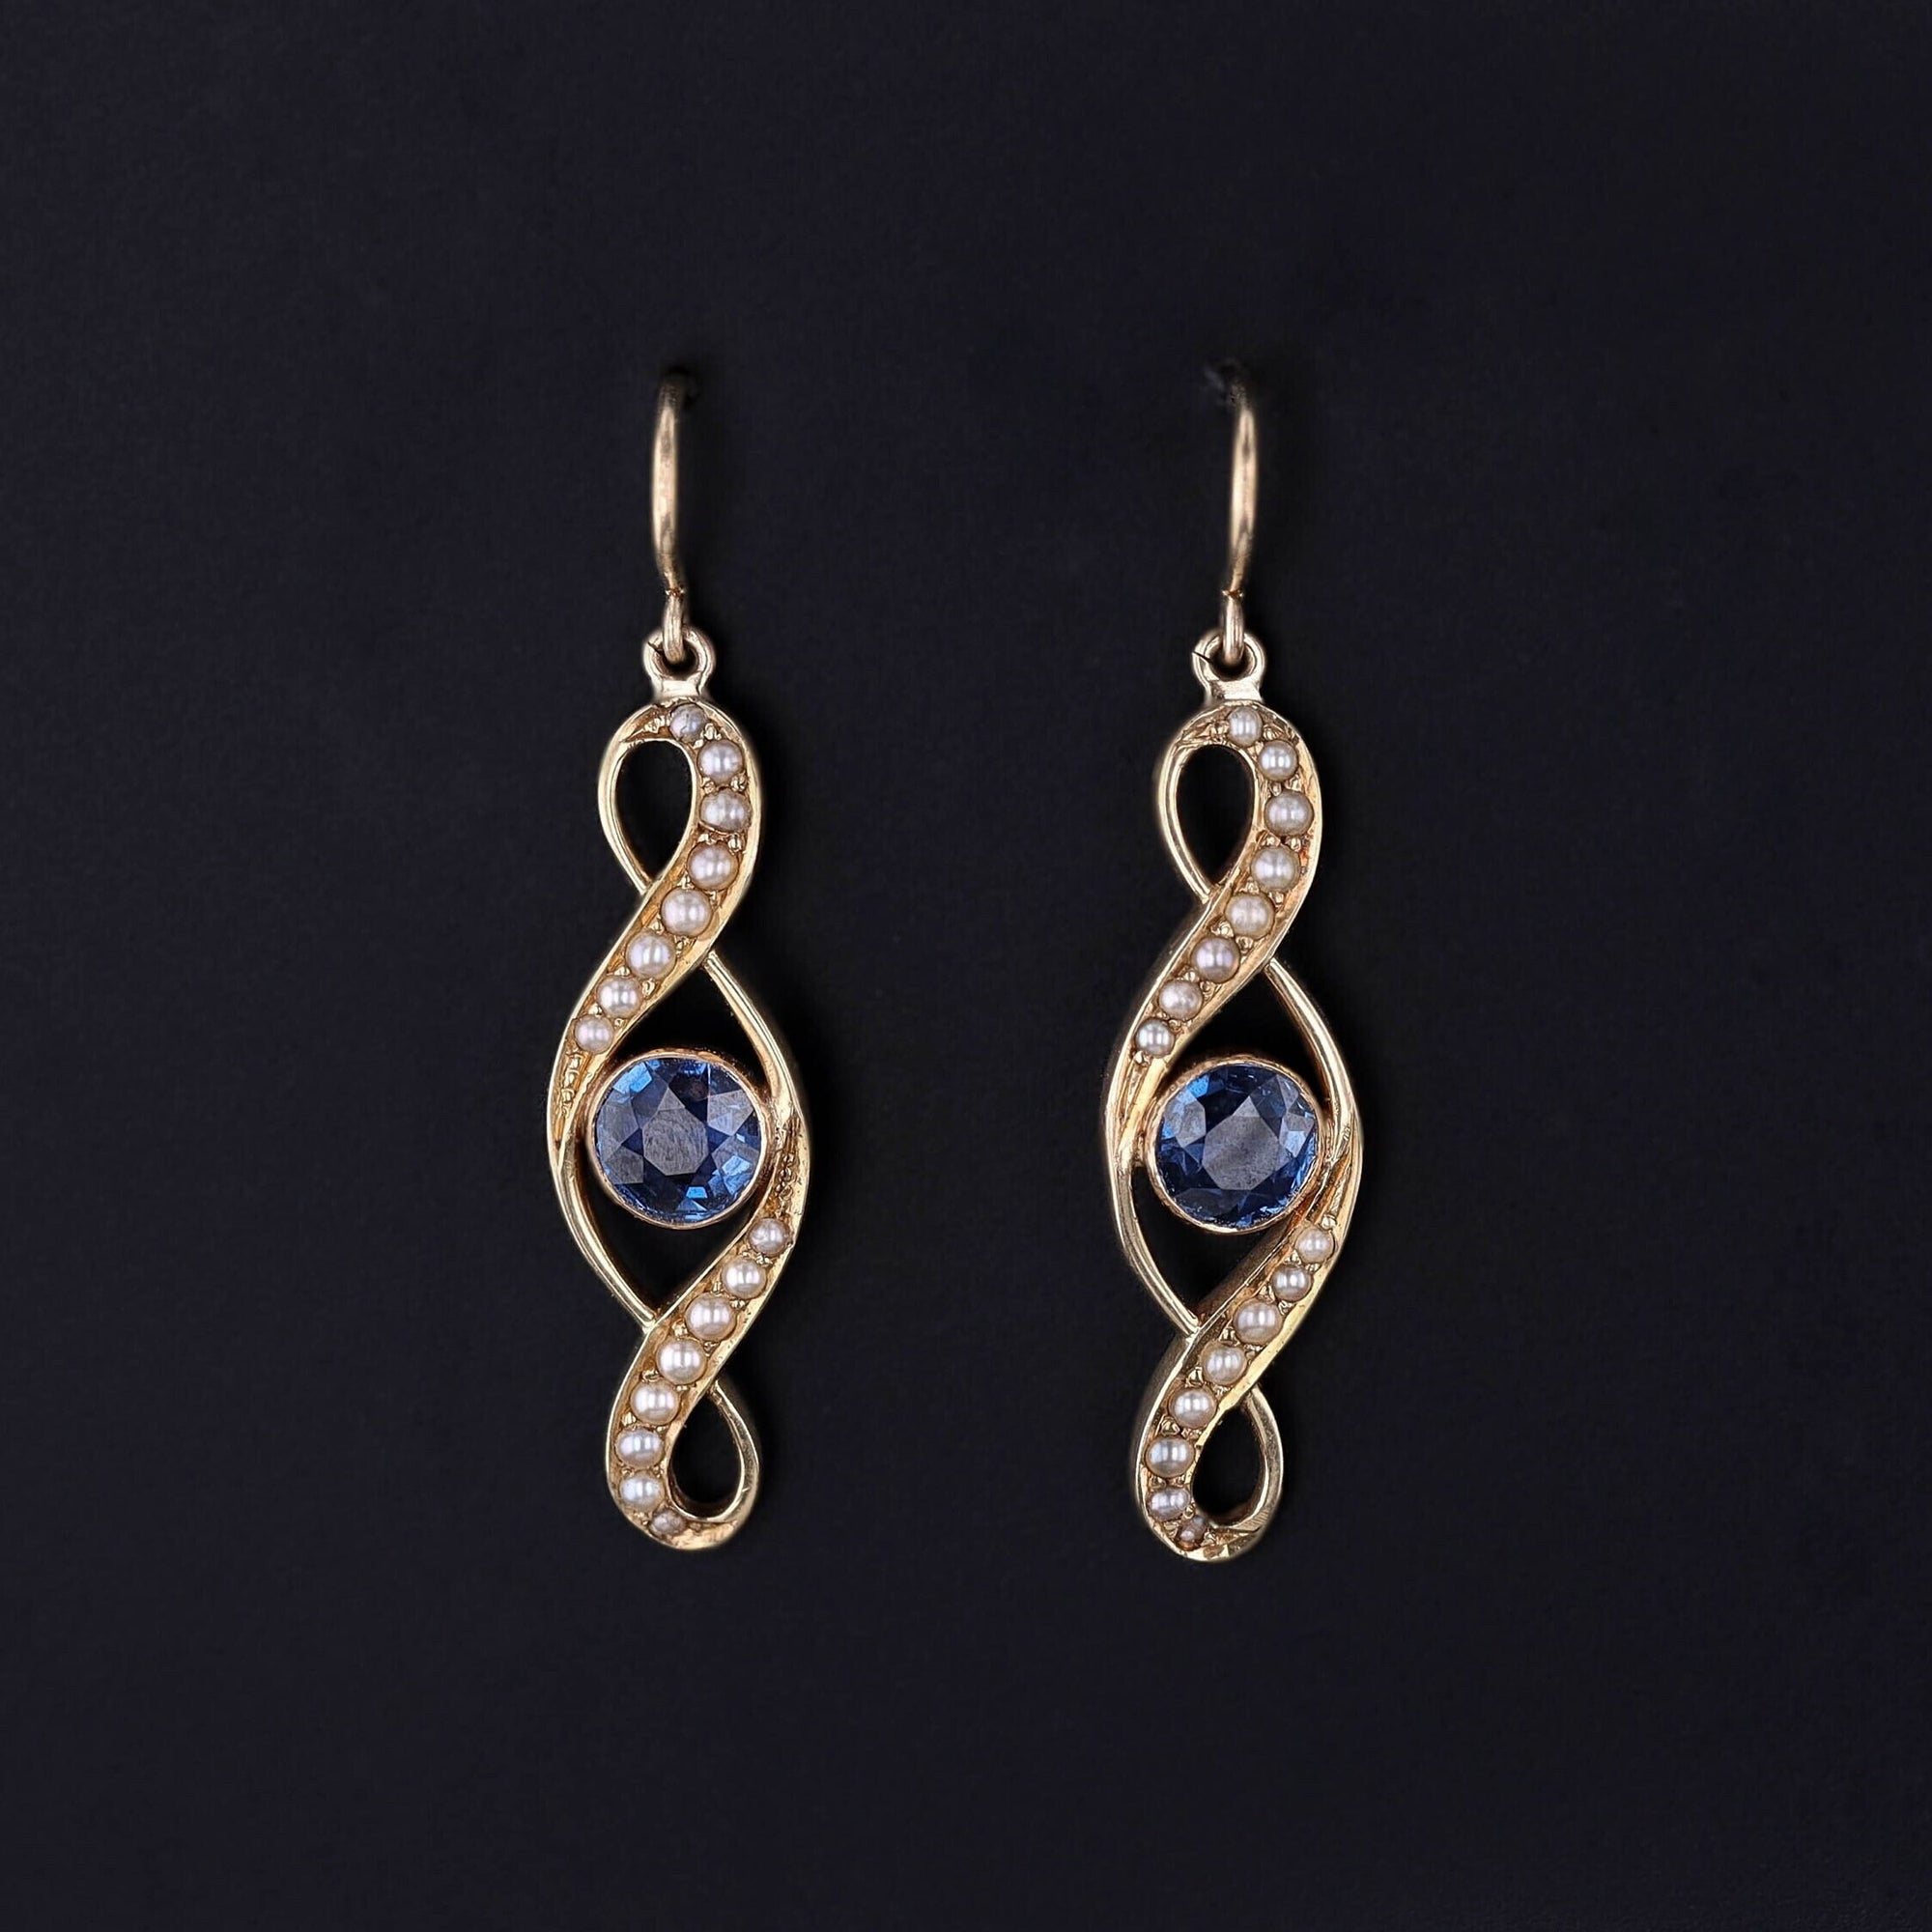 Antique Sapphire and Pearl Earrings of 14k Gold